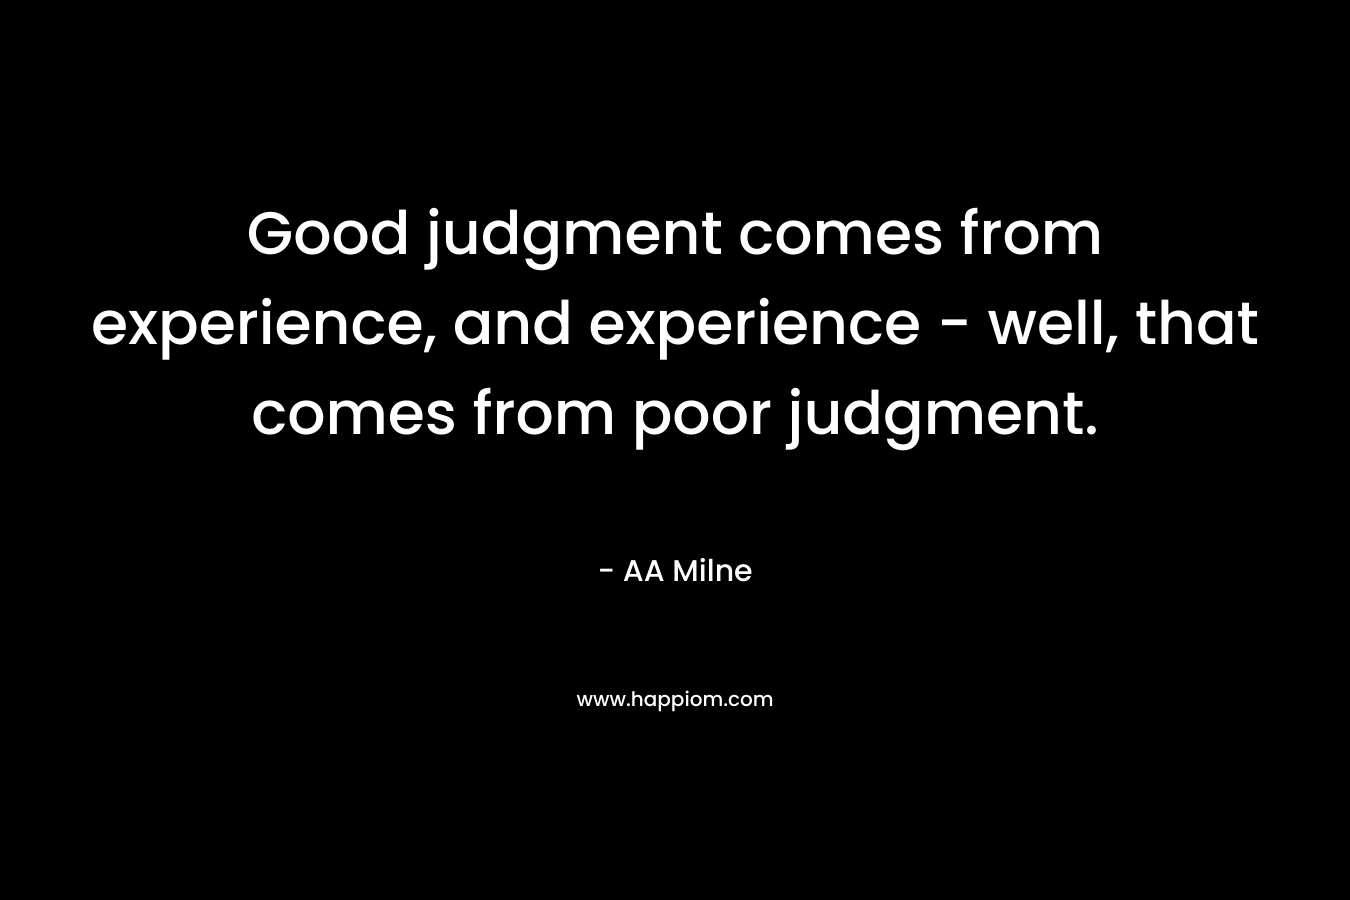 Good judgment comes from experience, and experience - well, that comes from poor judgment.